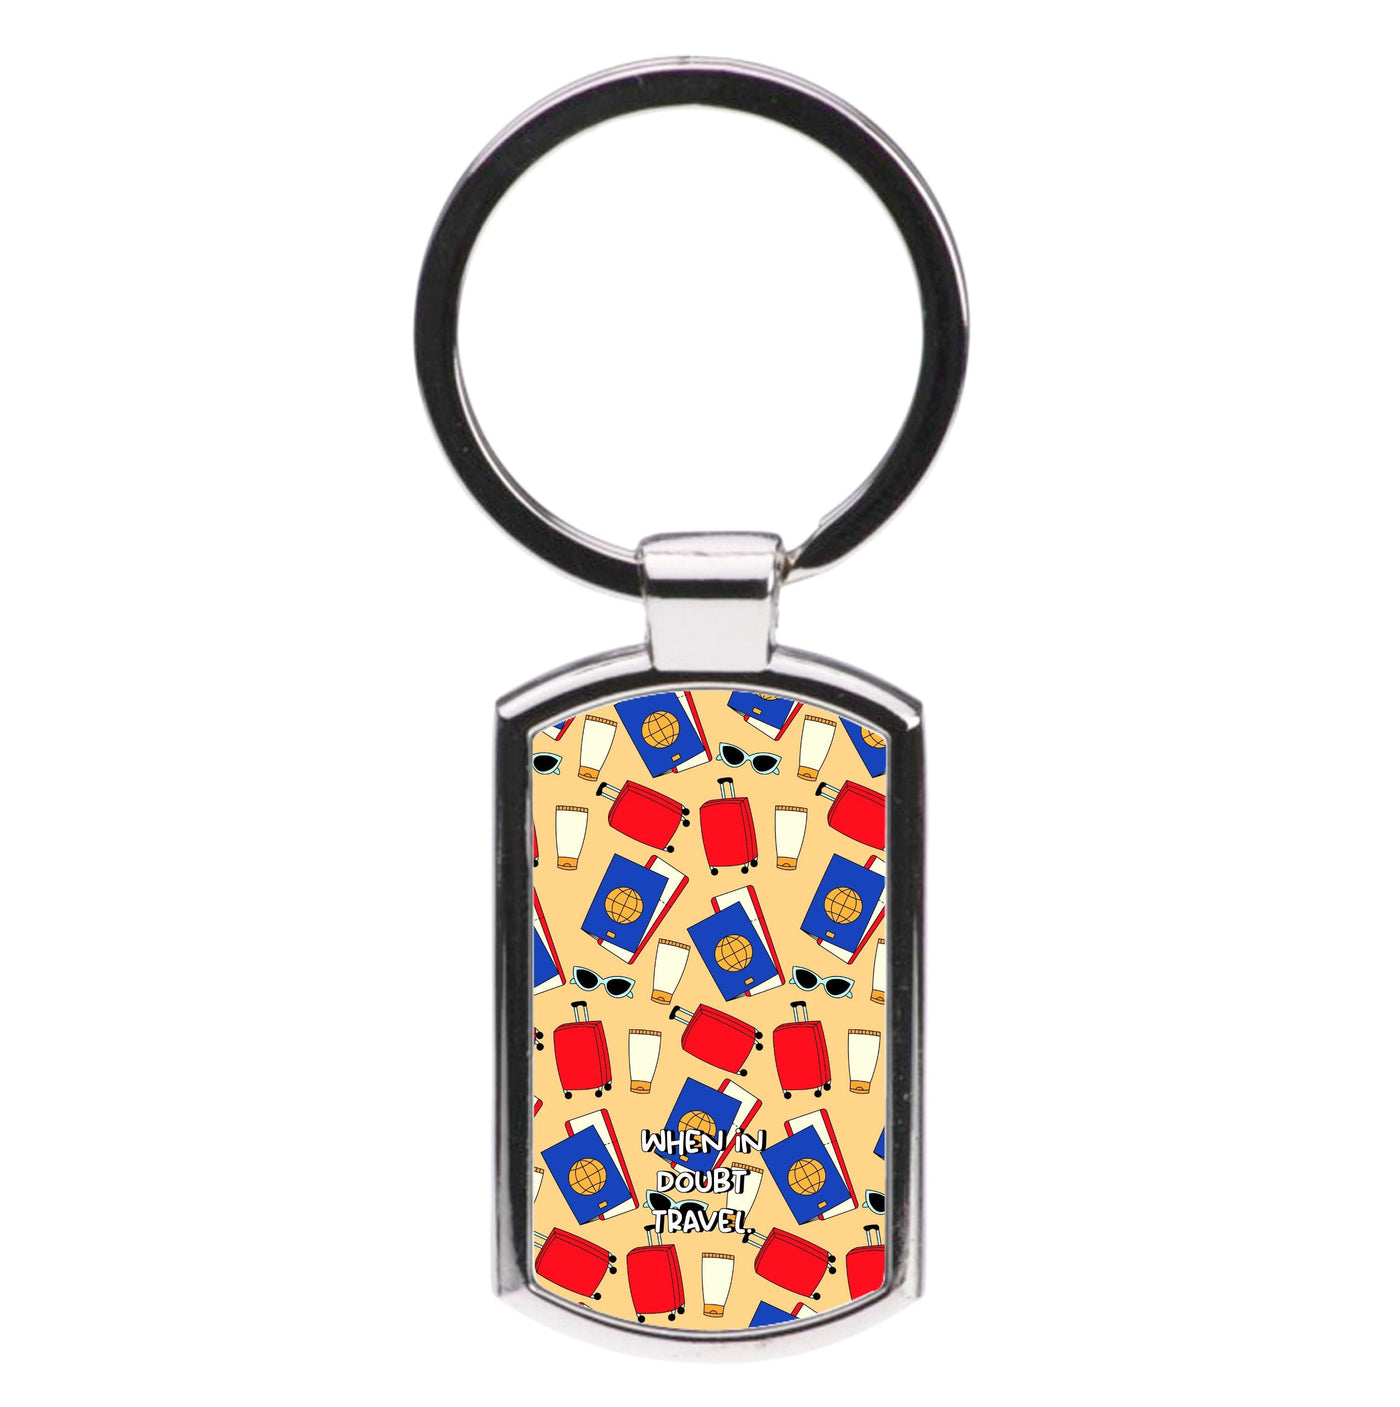 When In Doubt Travel - Travel Luxury Keyring